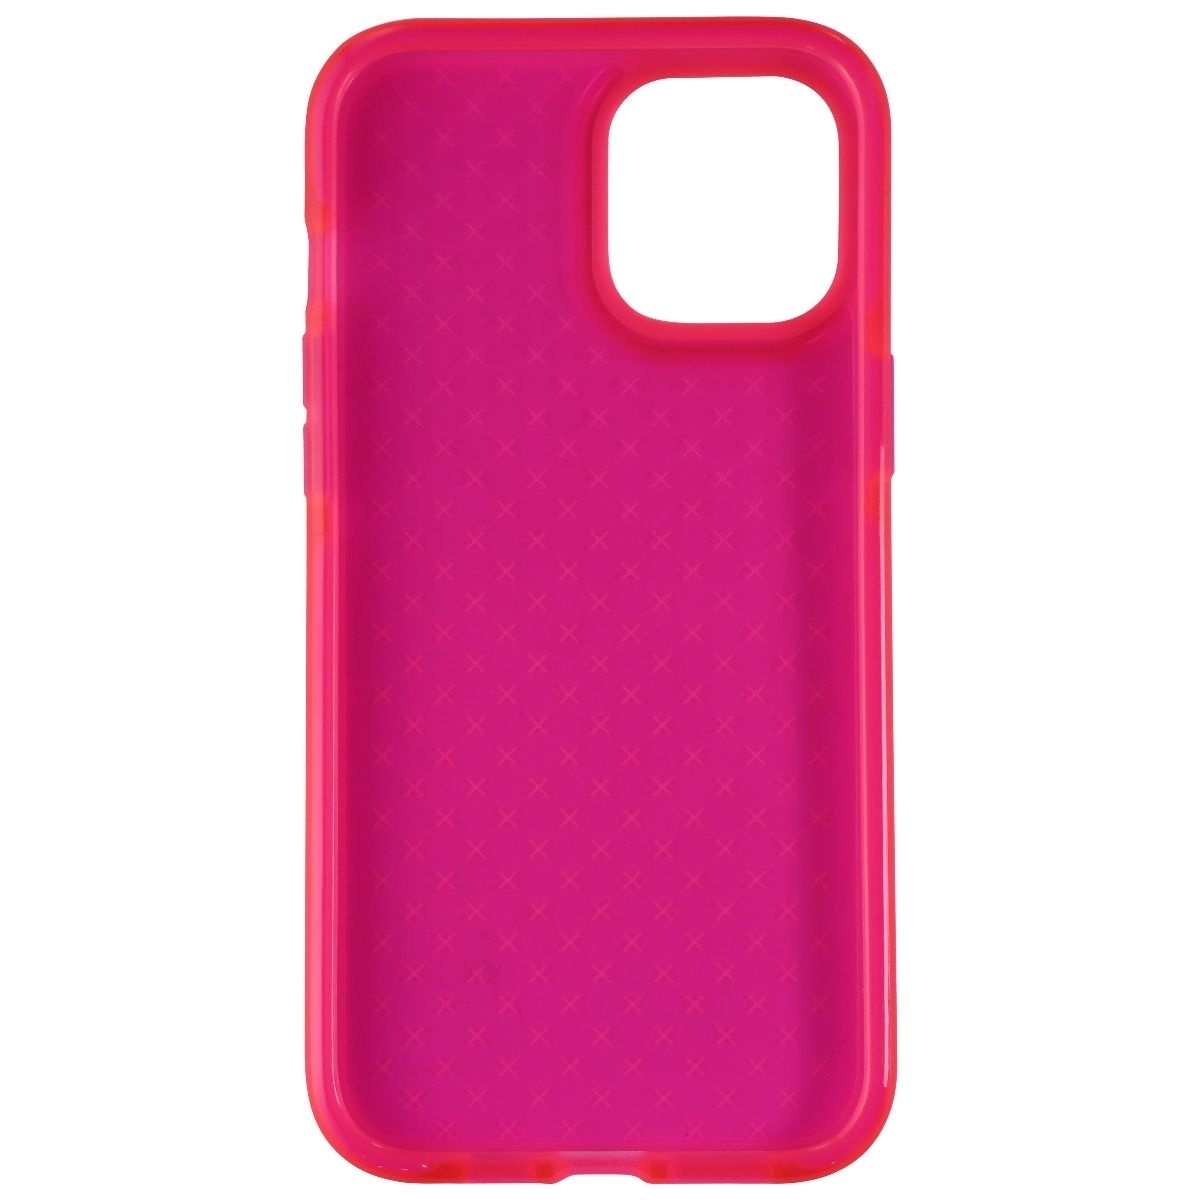 Tech21 Evo Check Series Flexible Case For Apple IPhone 12 Pro Max - Pink